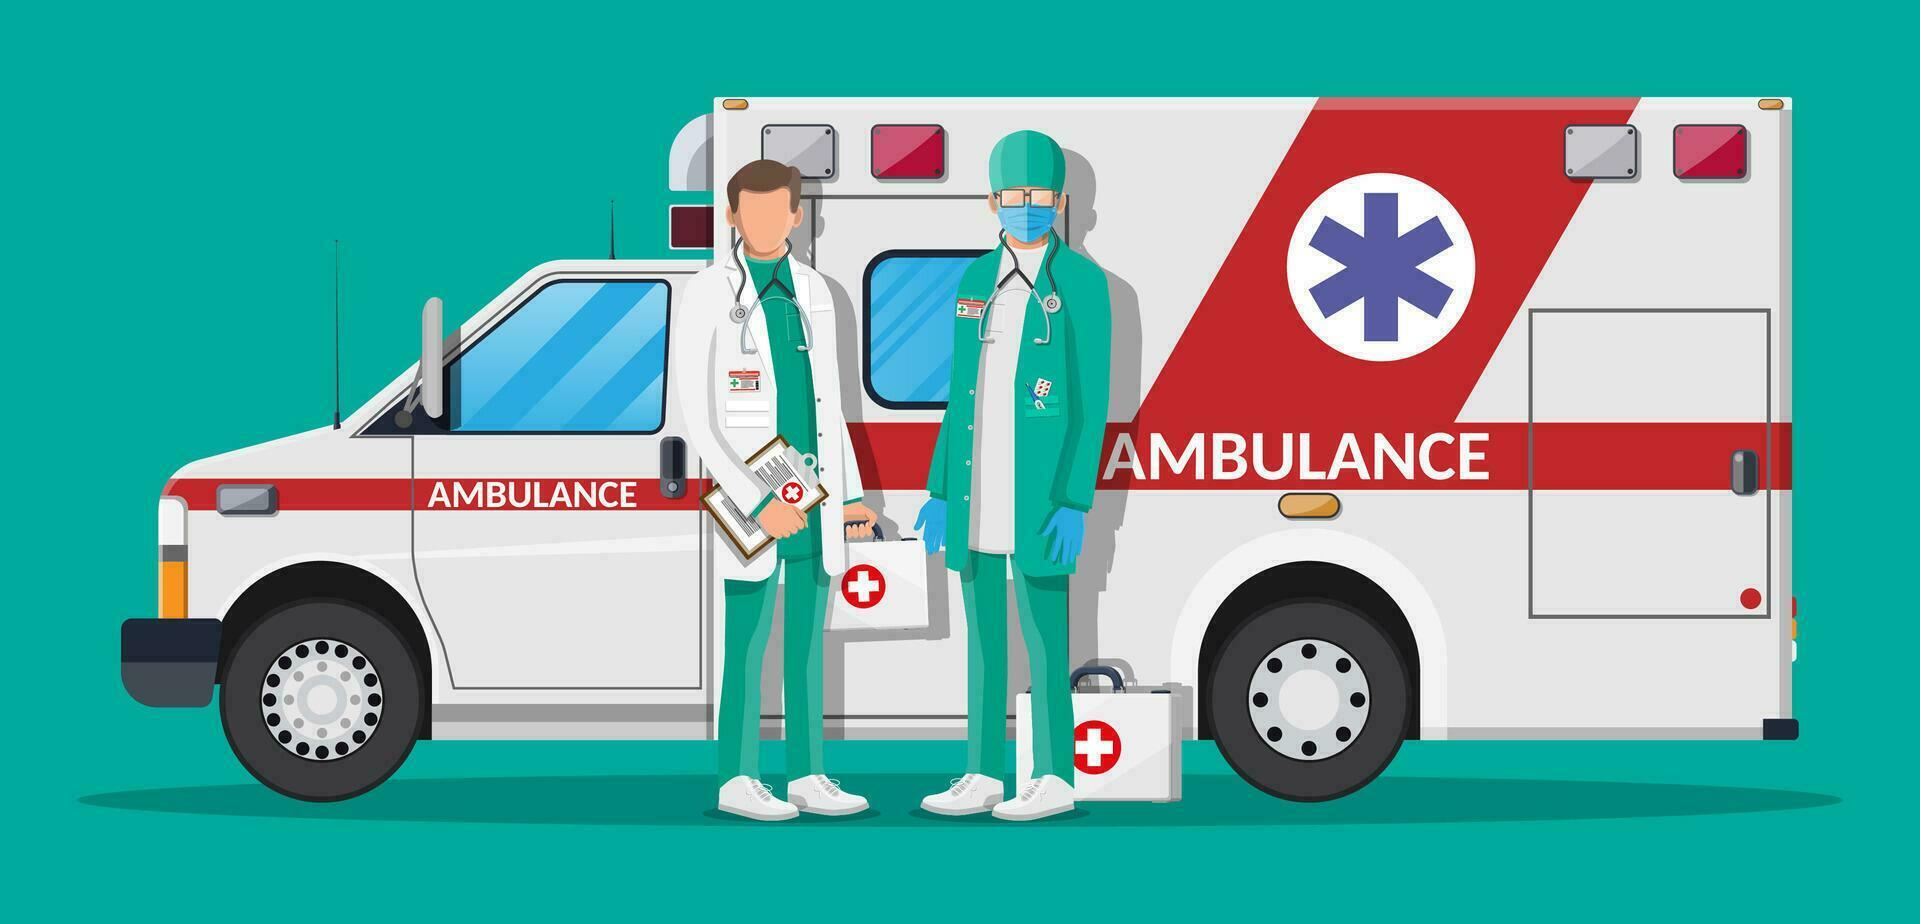 Ambulance staff concept. Doctor in white coat with stethoscope and case. Ambulance car, emergency vehicle. Healthcare, hospital and medical diagnostics. Urgency services. Flat vector illustration